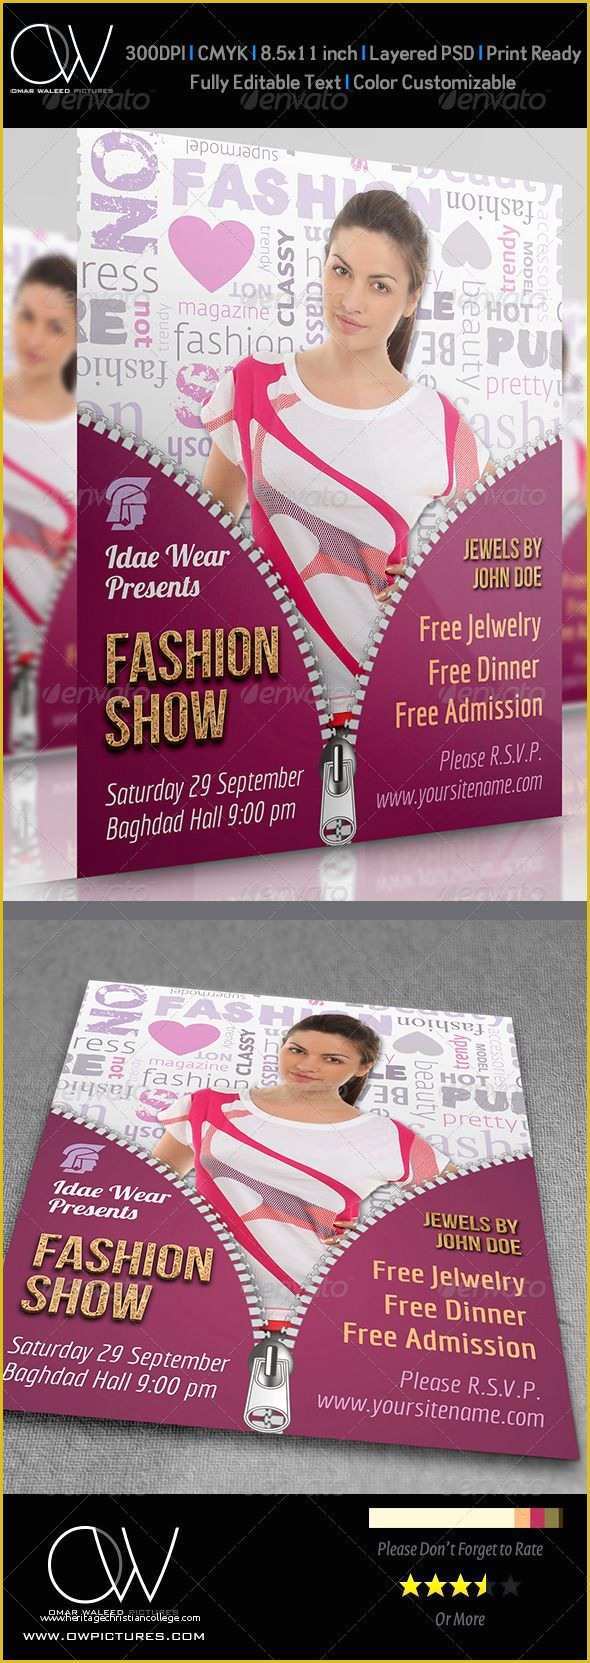 Free Clothing Store Flyer Templates Of Fashion Design Flyer Template Free Yourweek B056e0eca25e